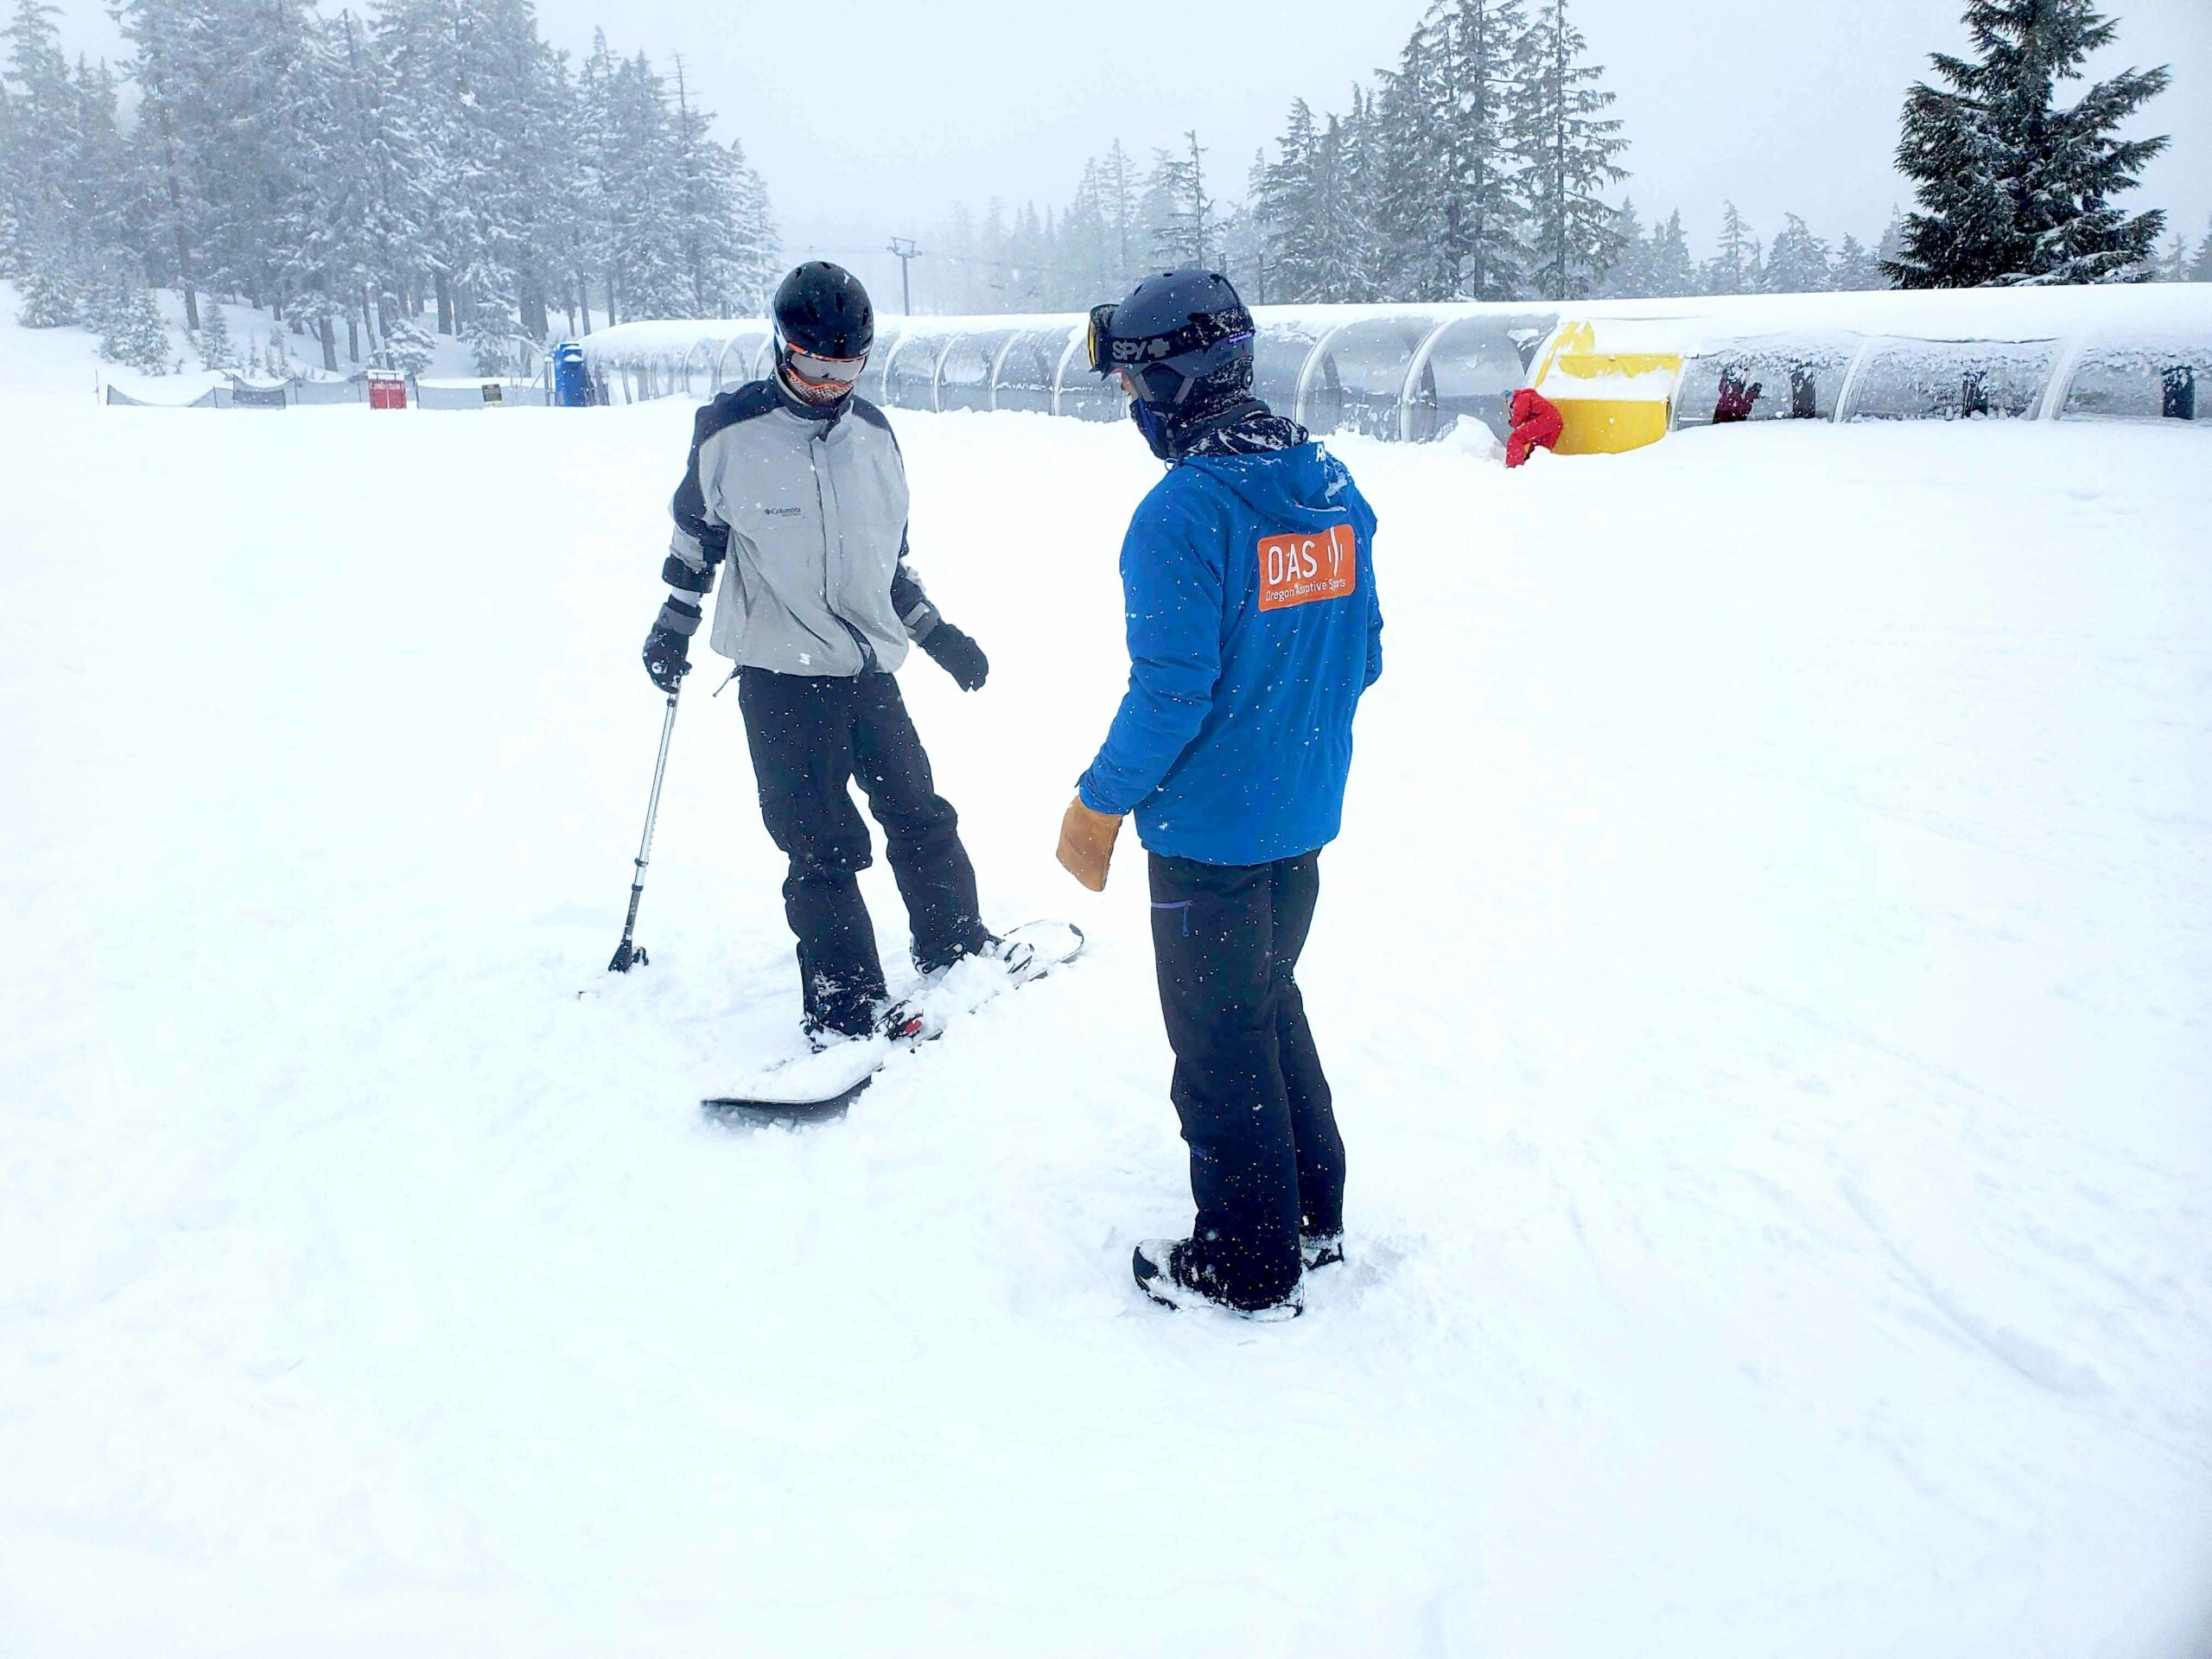 michael snowboarding with an OAS instructor